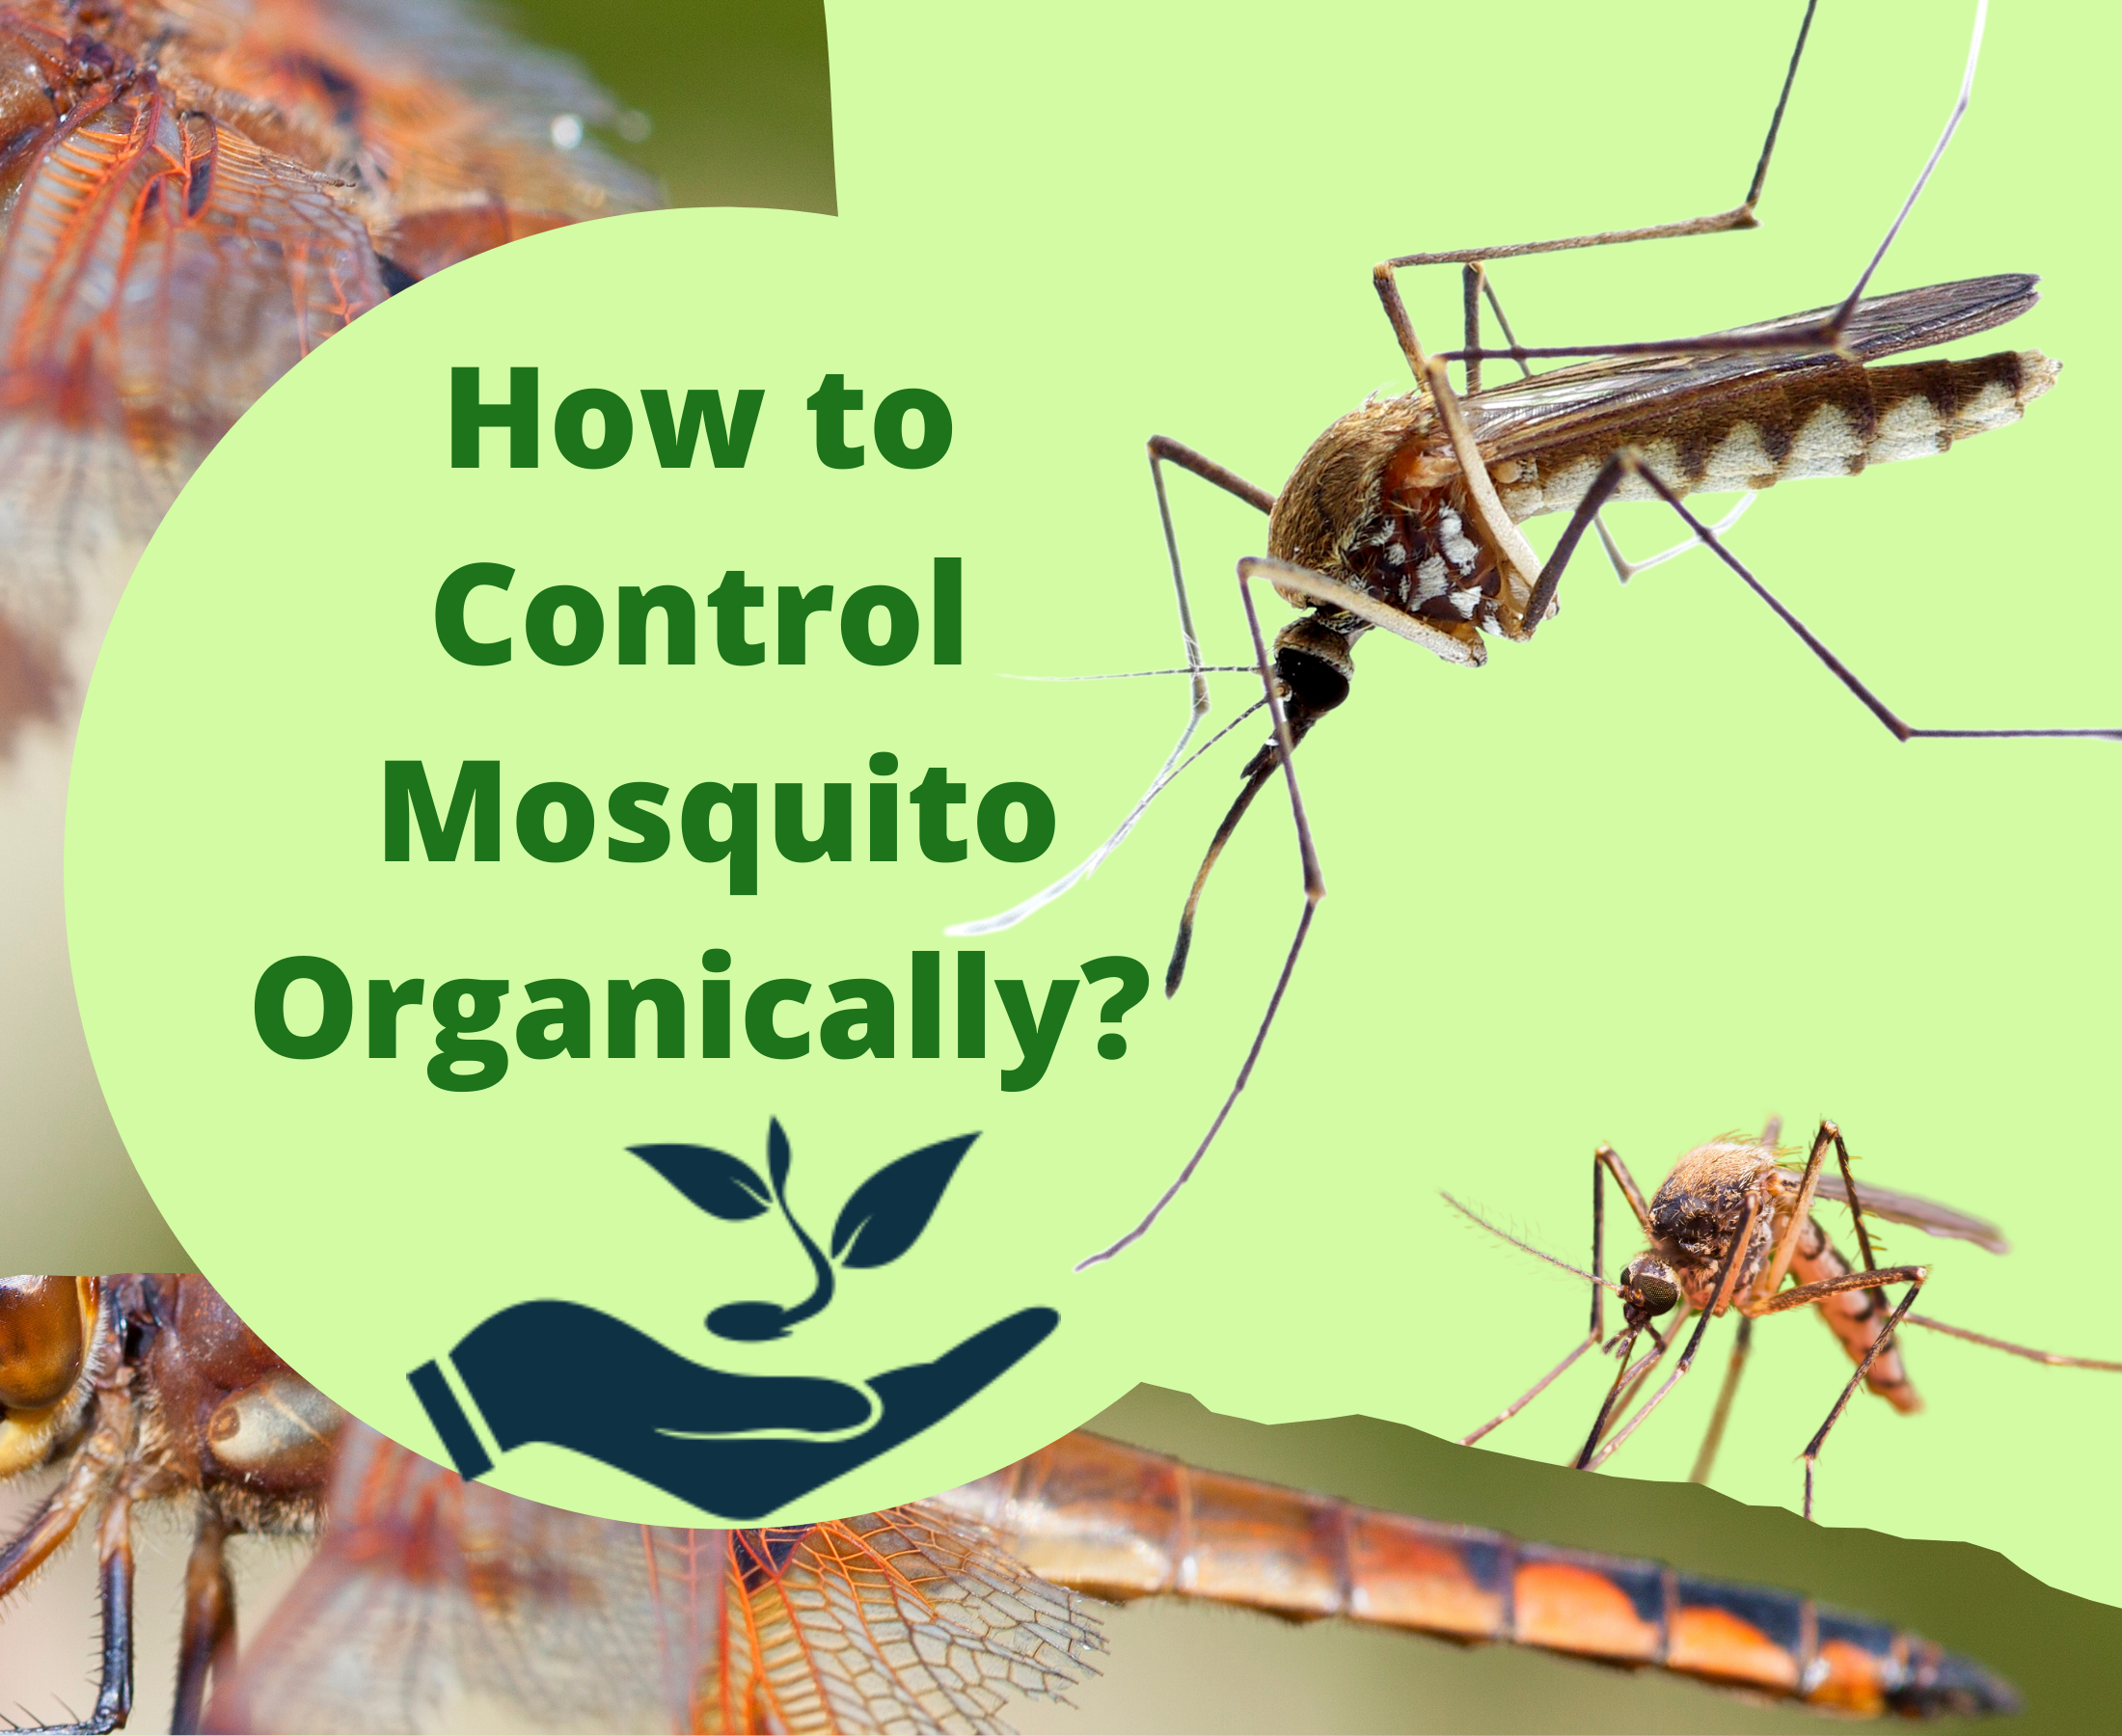 Are insecticides present in nature opt to protect from mosquitoes?